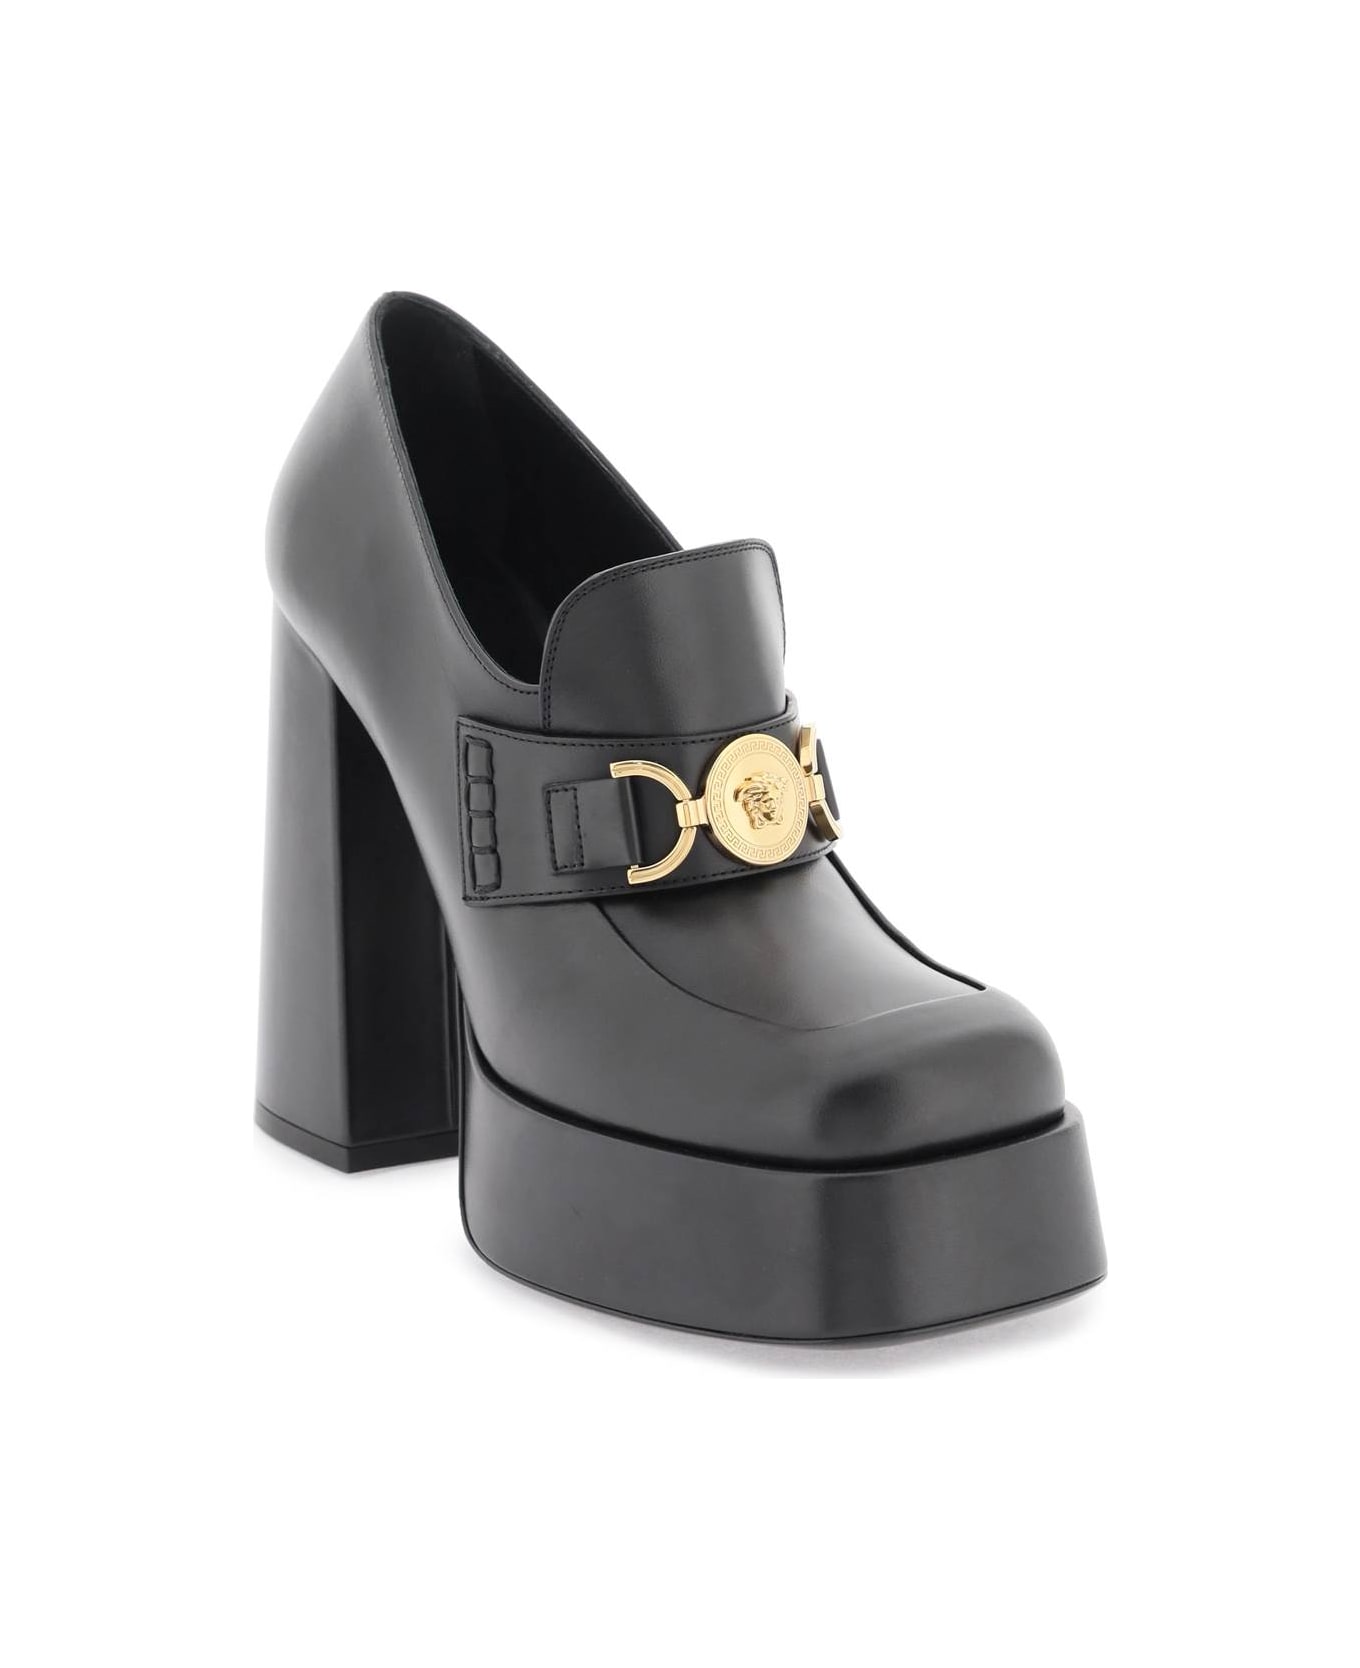 Versace Logo Detail Leather Loafers - Black ハイヒール